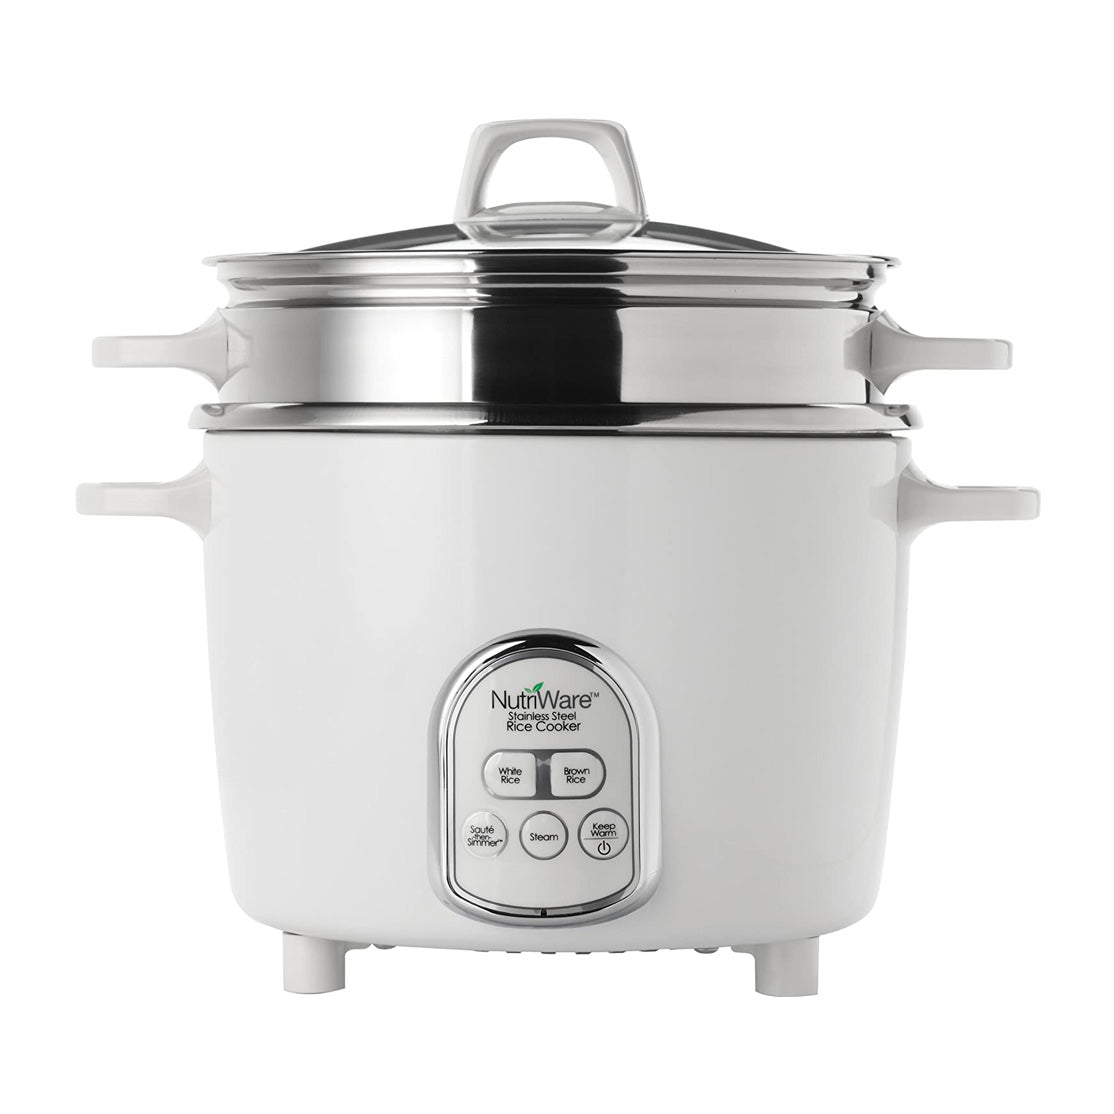 Aroma Rice Cooker, Multicooker & Food Steamer 